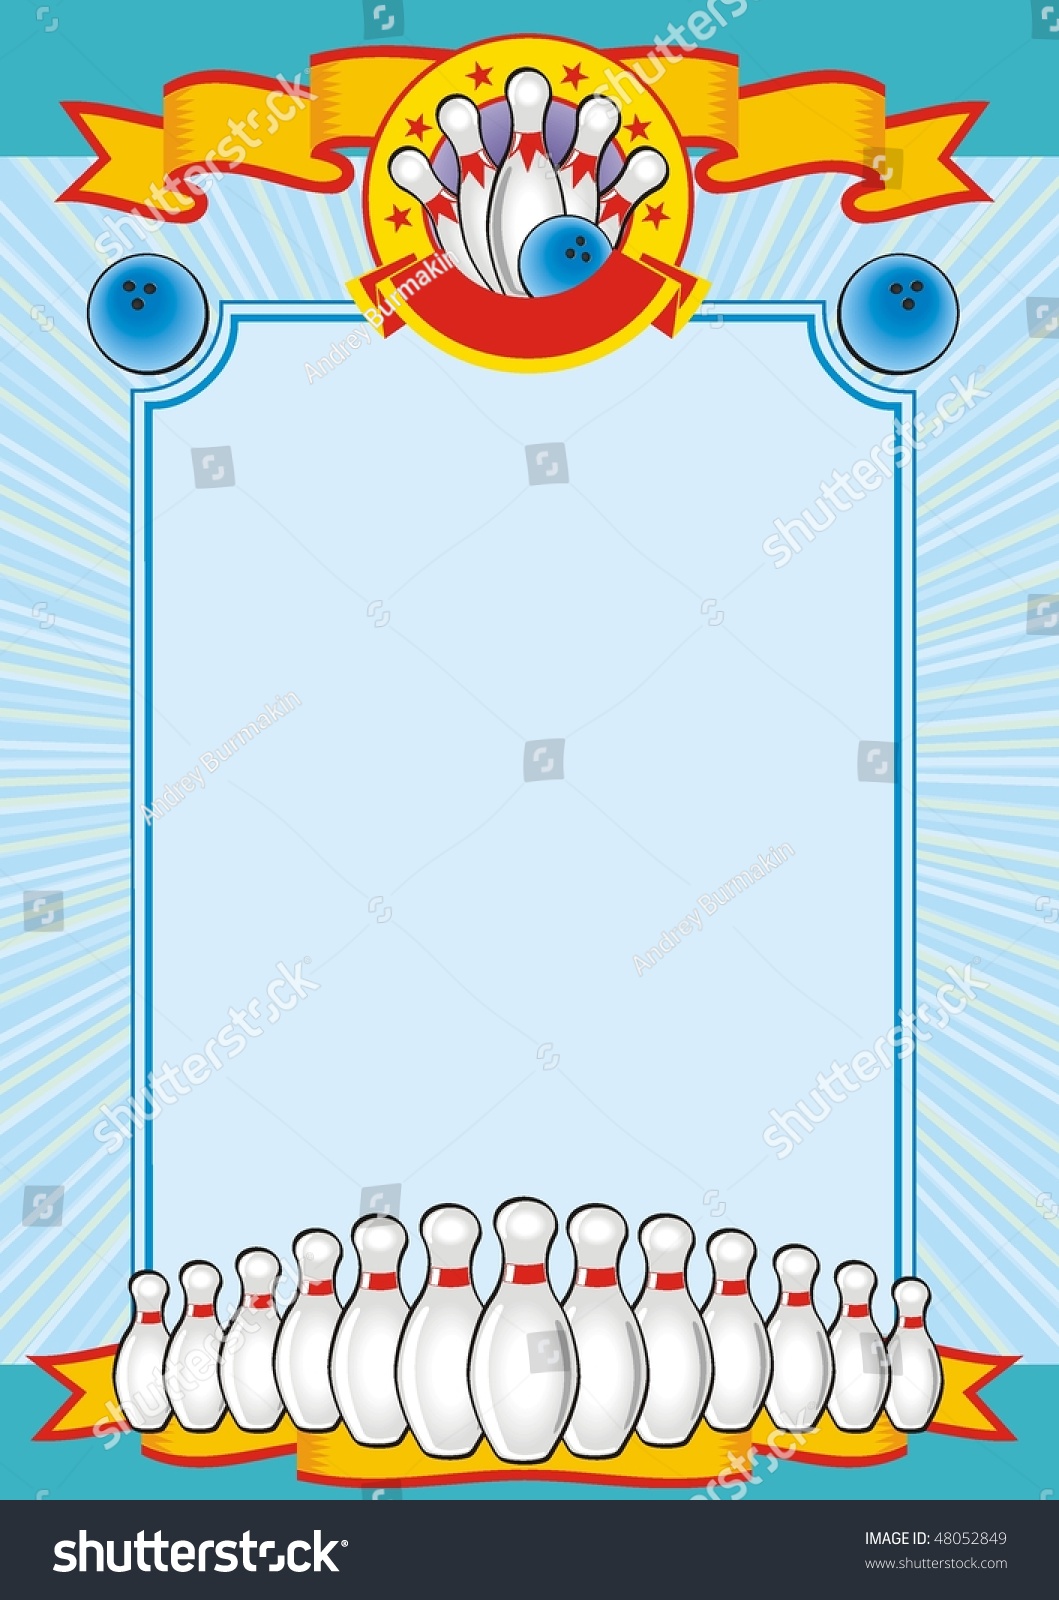 Bowling Diploma A4 Vector - 48052849 : Shutterstock